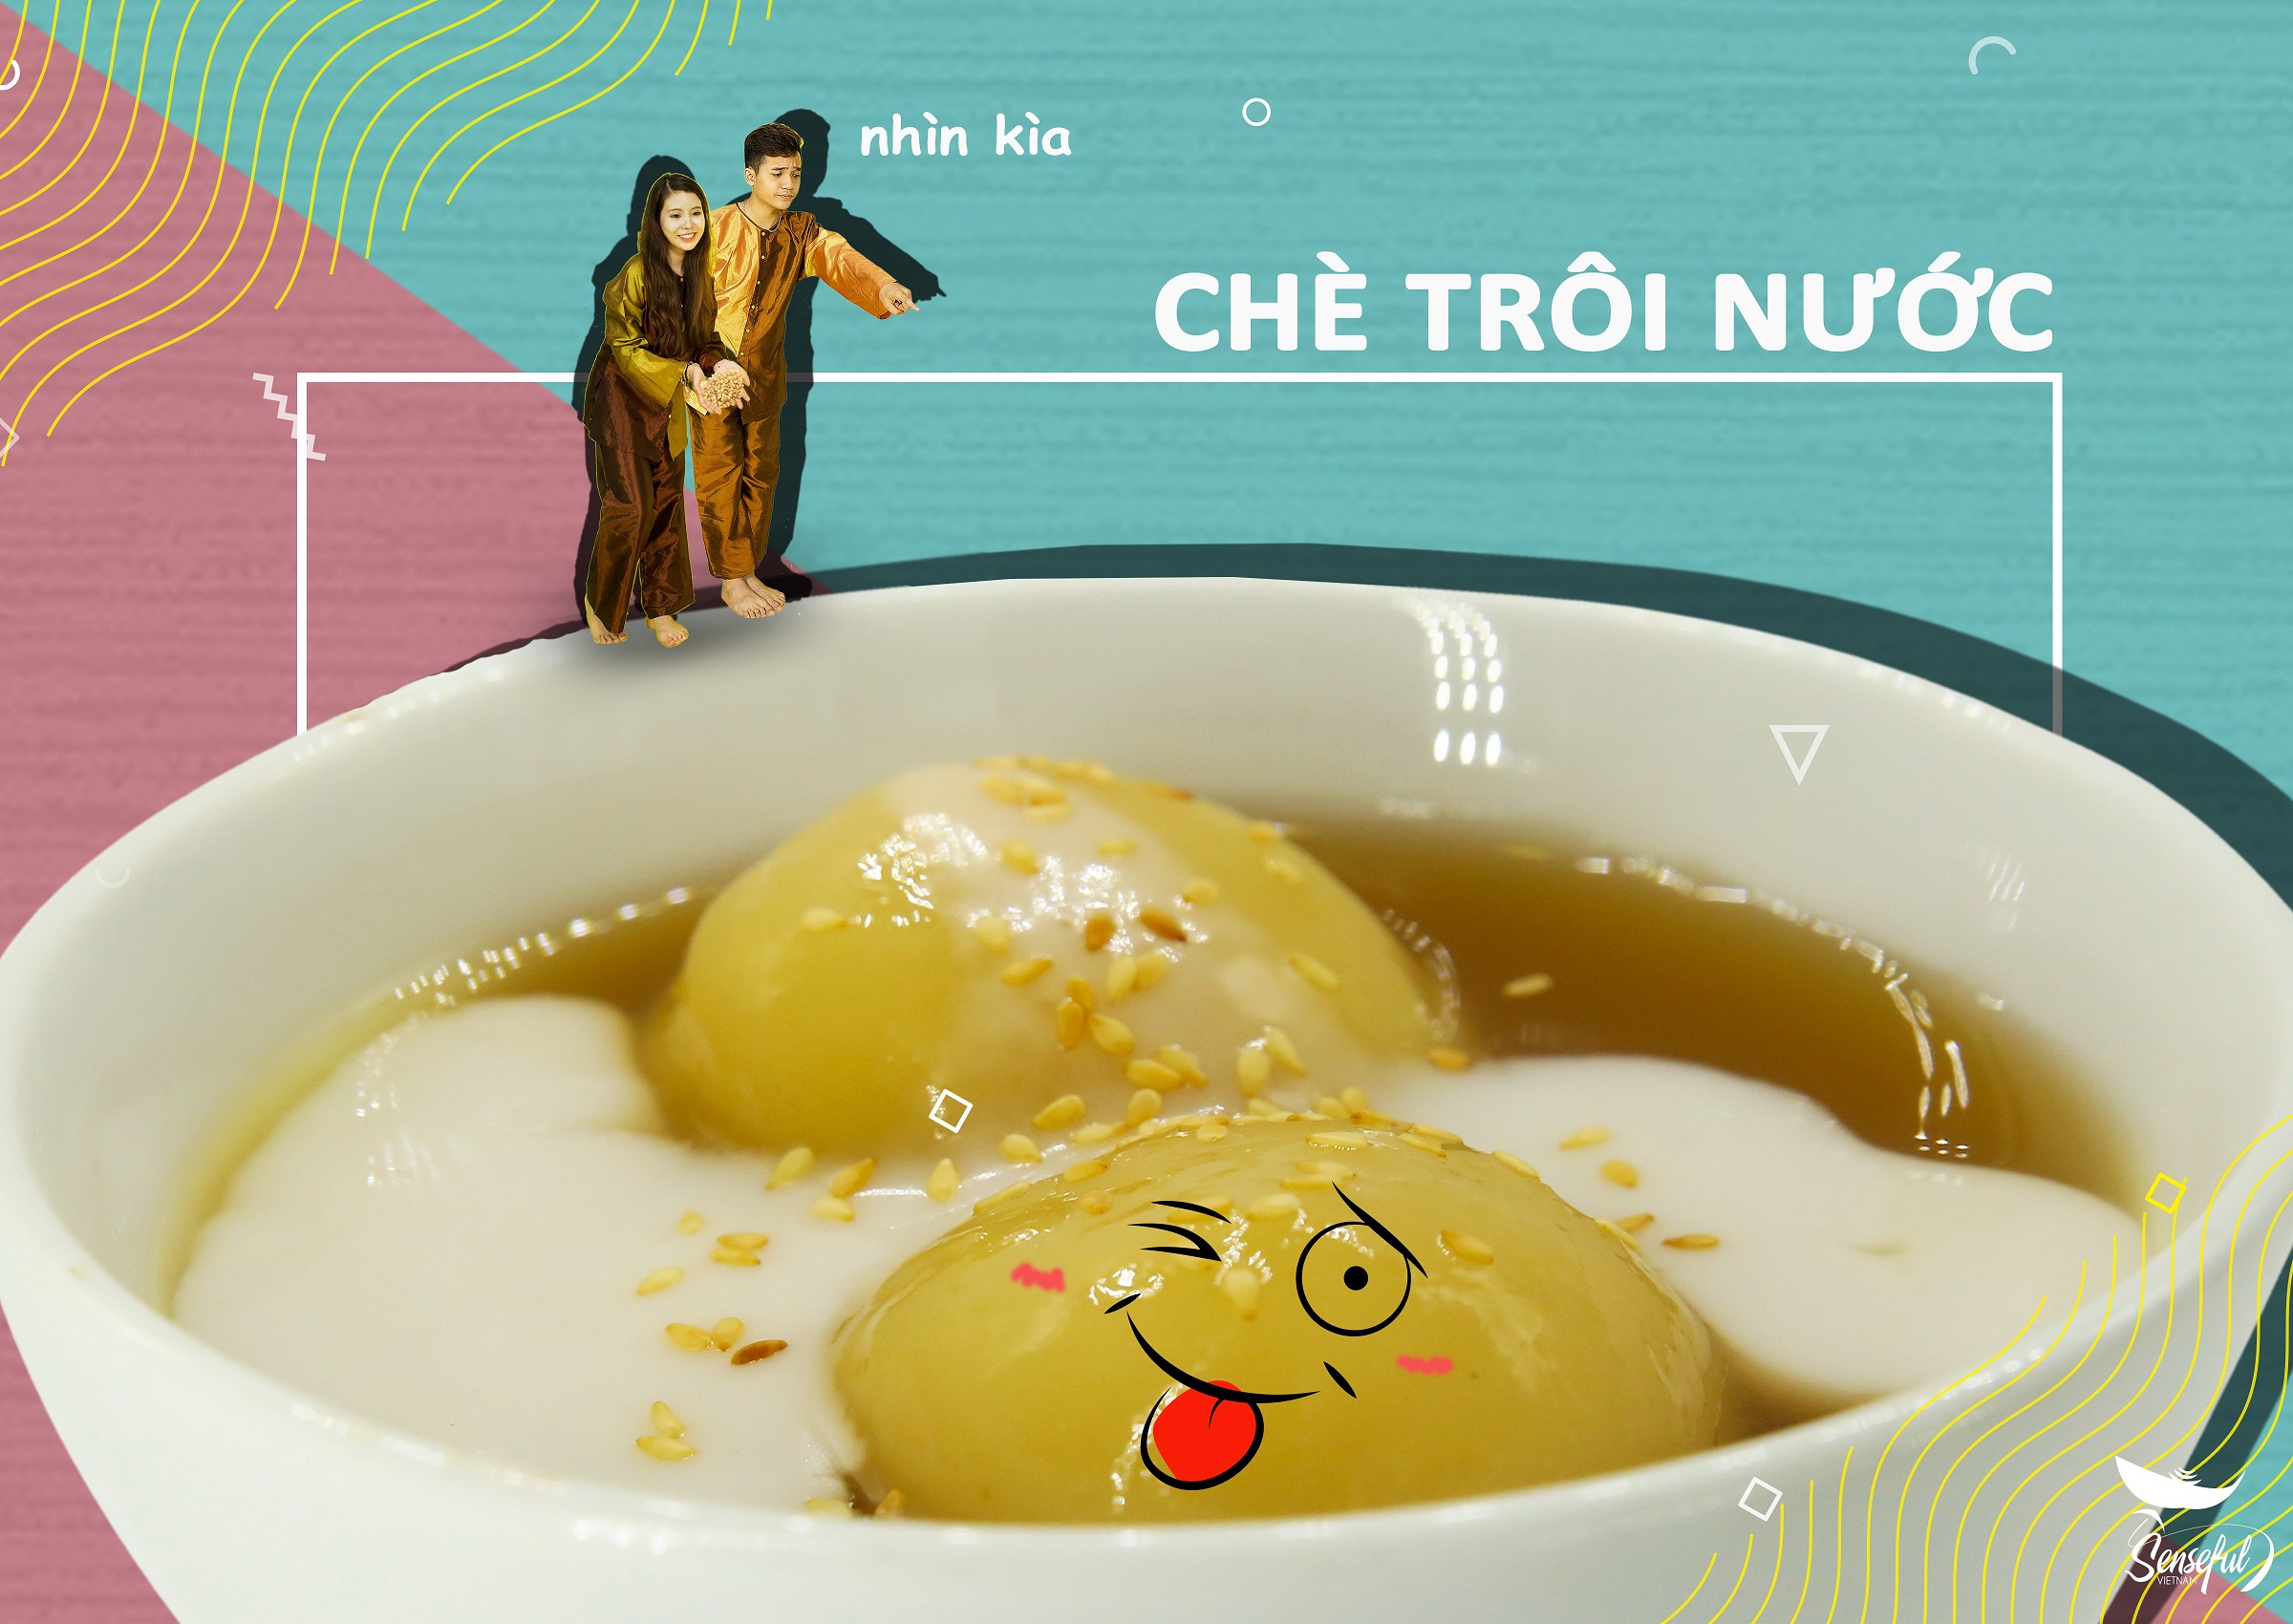 Che troi nuoc (sweet dessert soup with sticky rice balls and mung bean fillings)